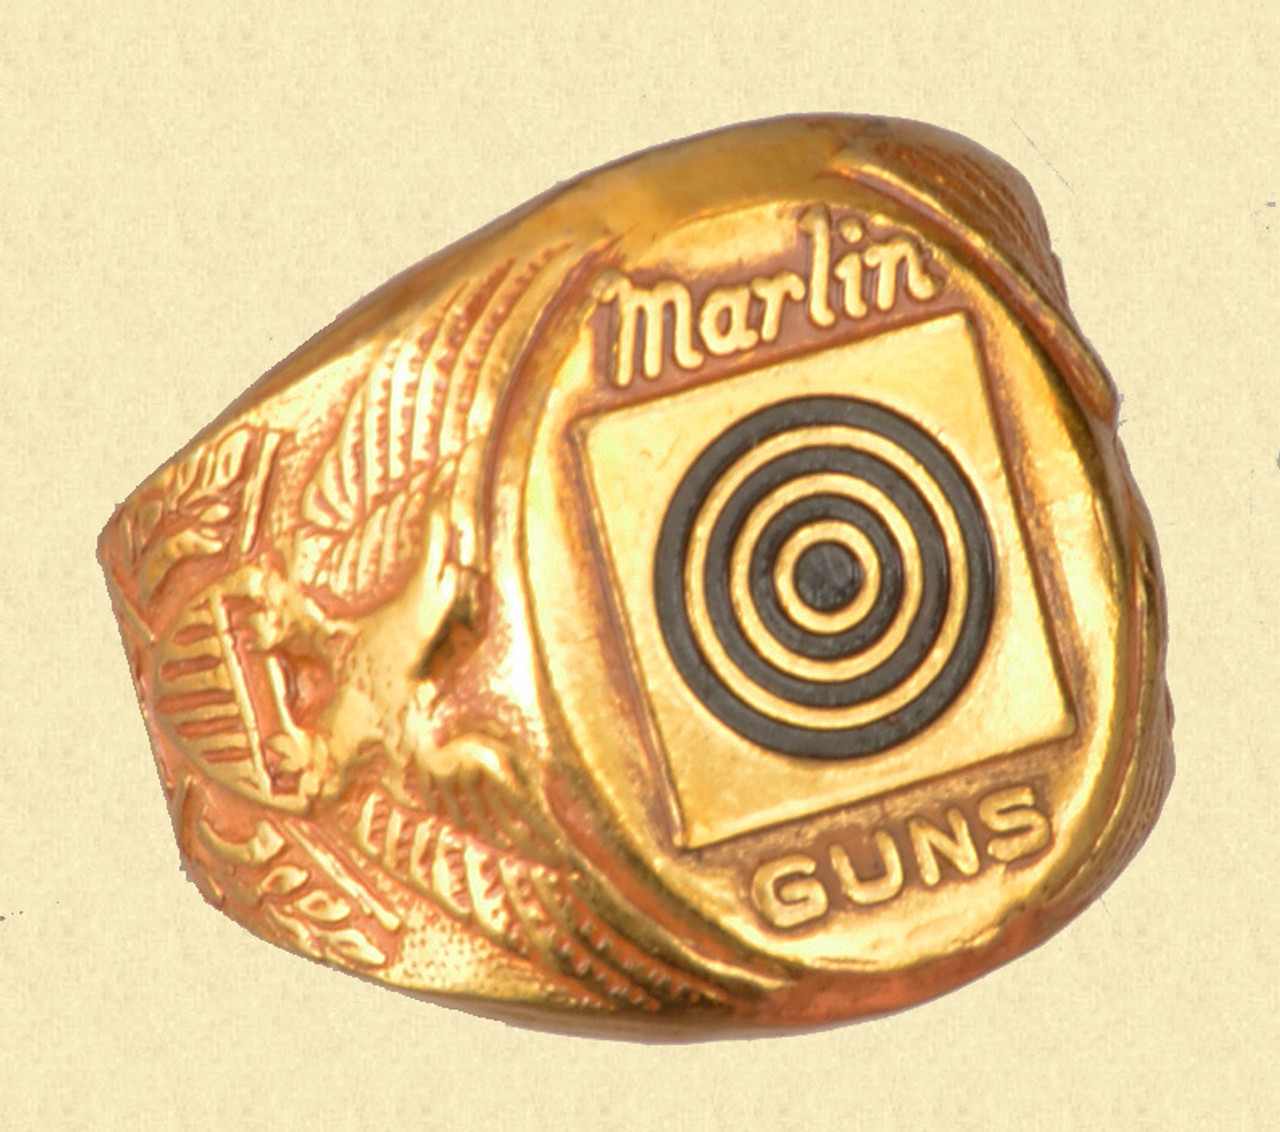 MARLIN Promotional Ring - M10174